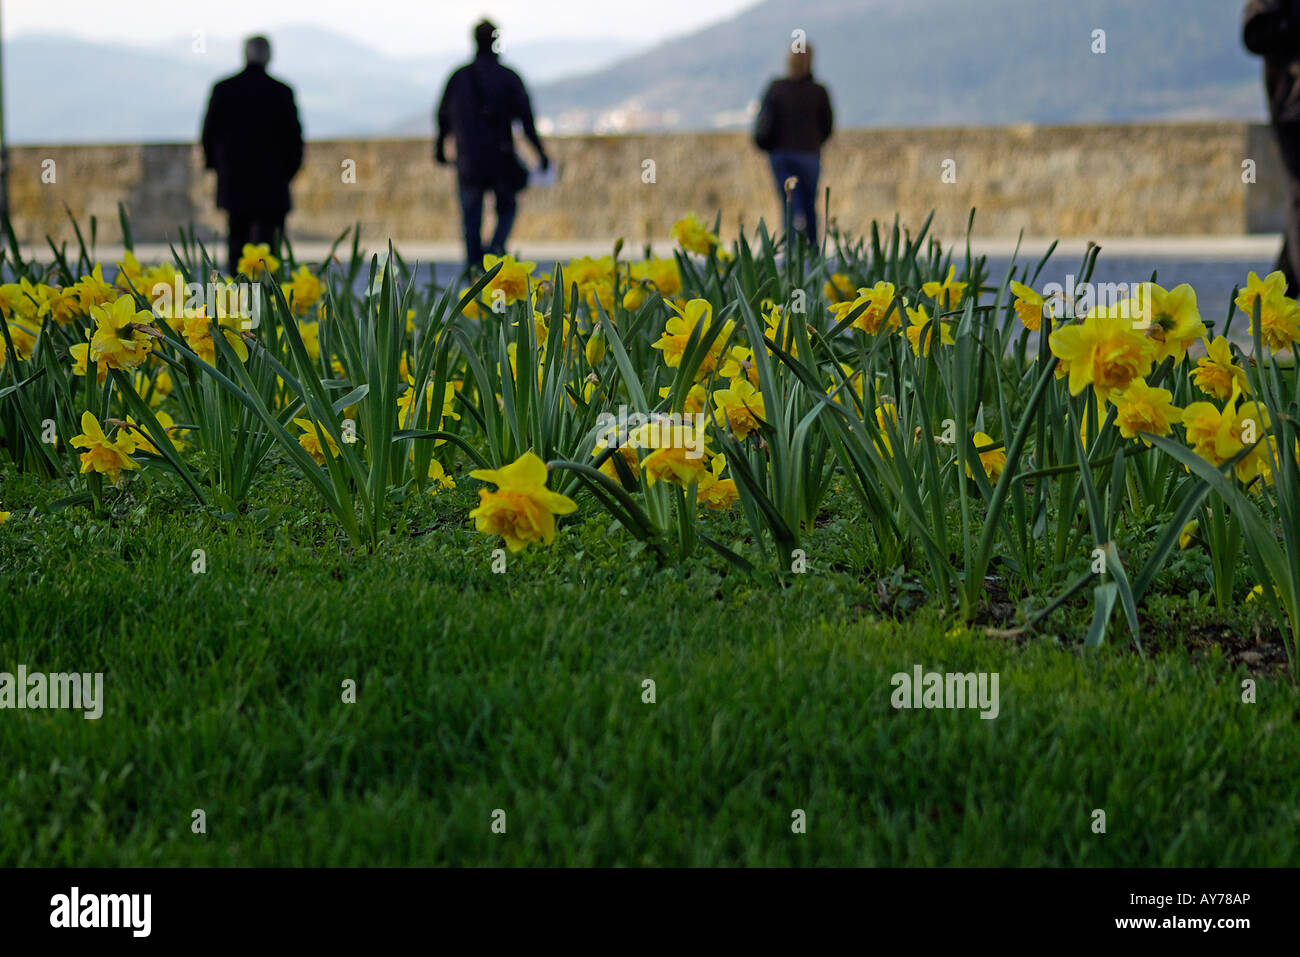 Flowers of a garden with people walking Stock Photo